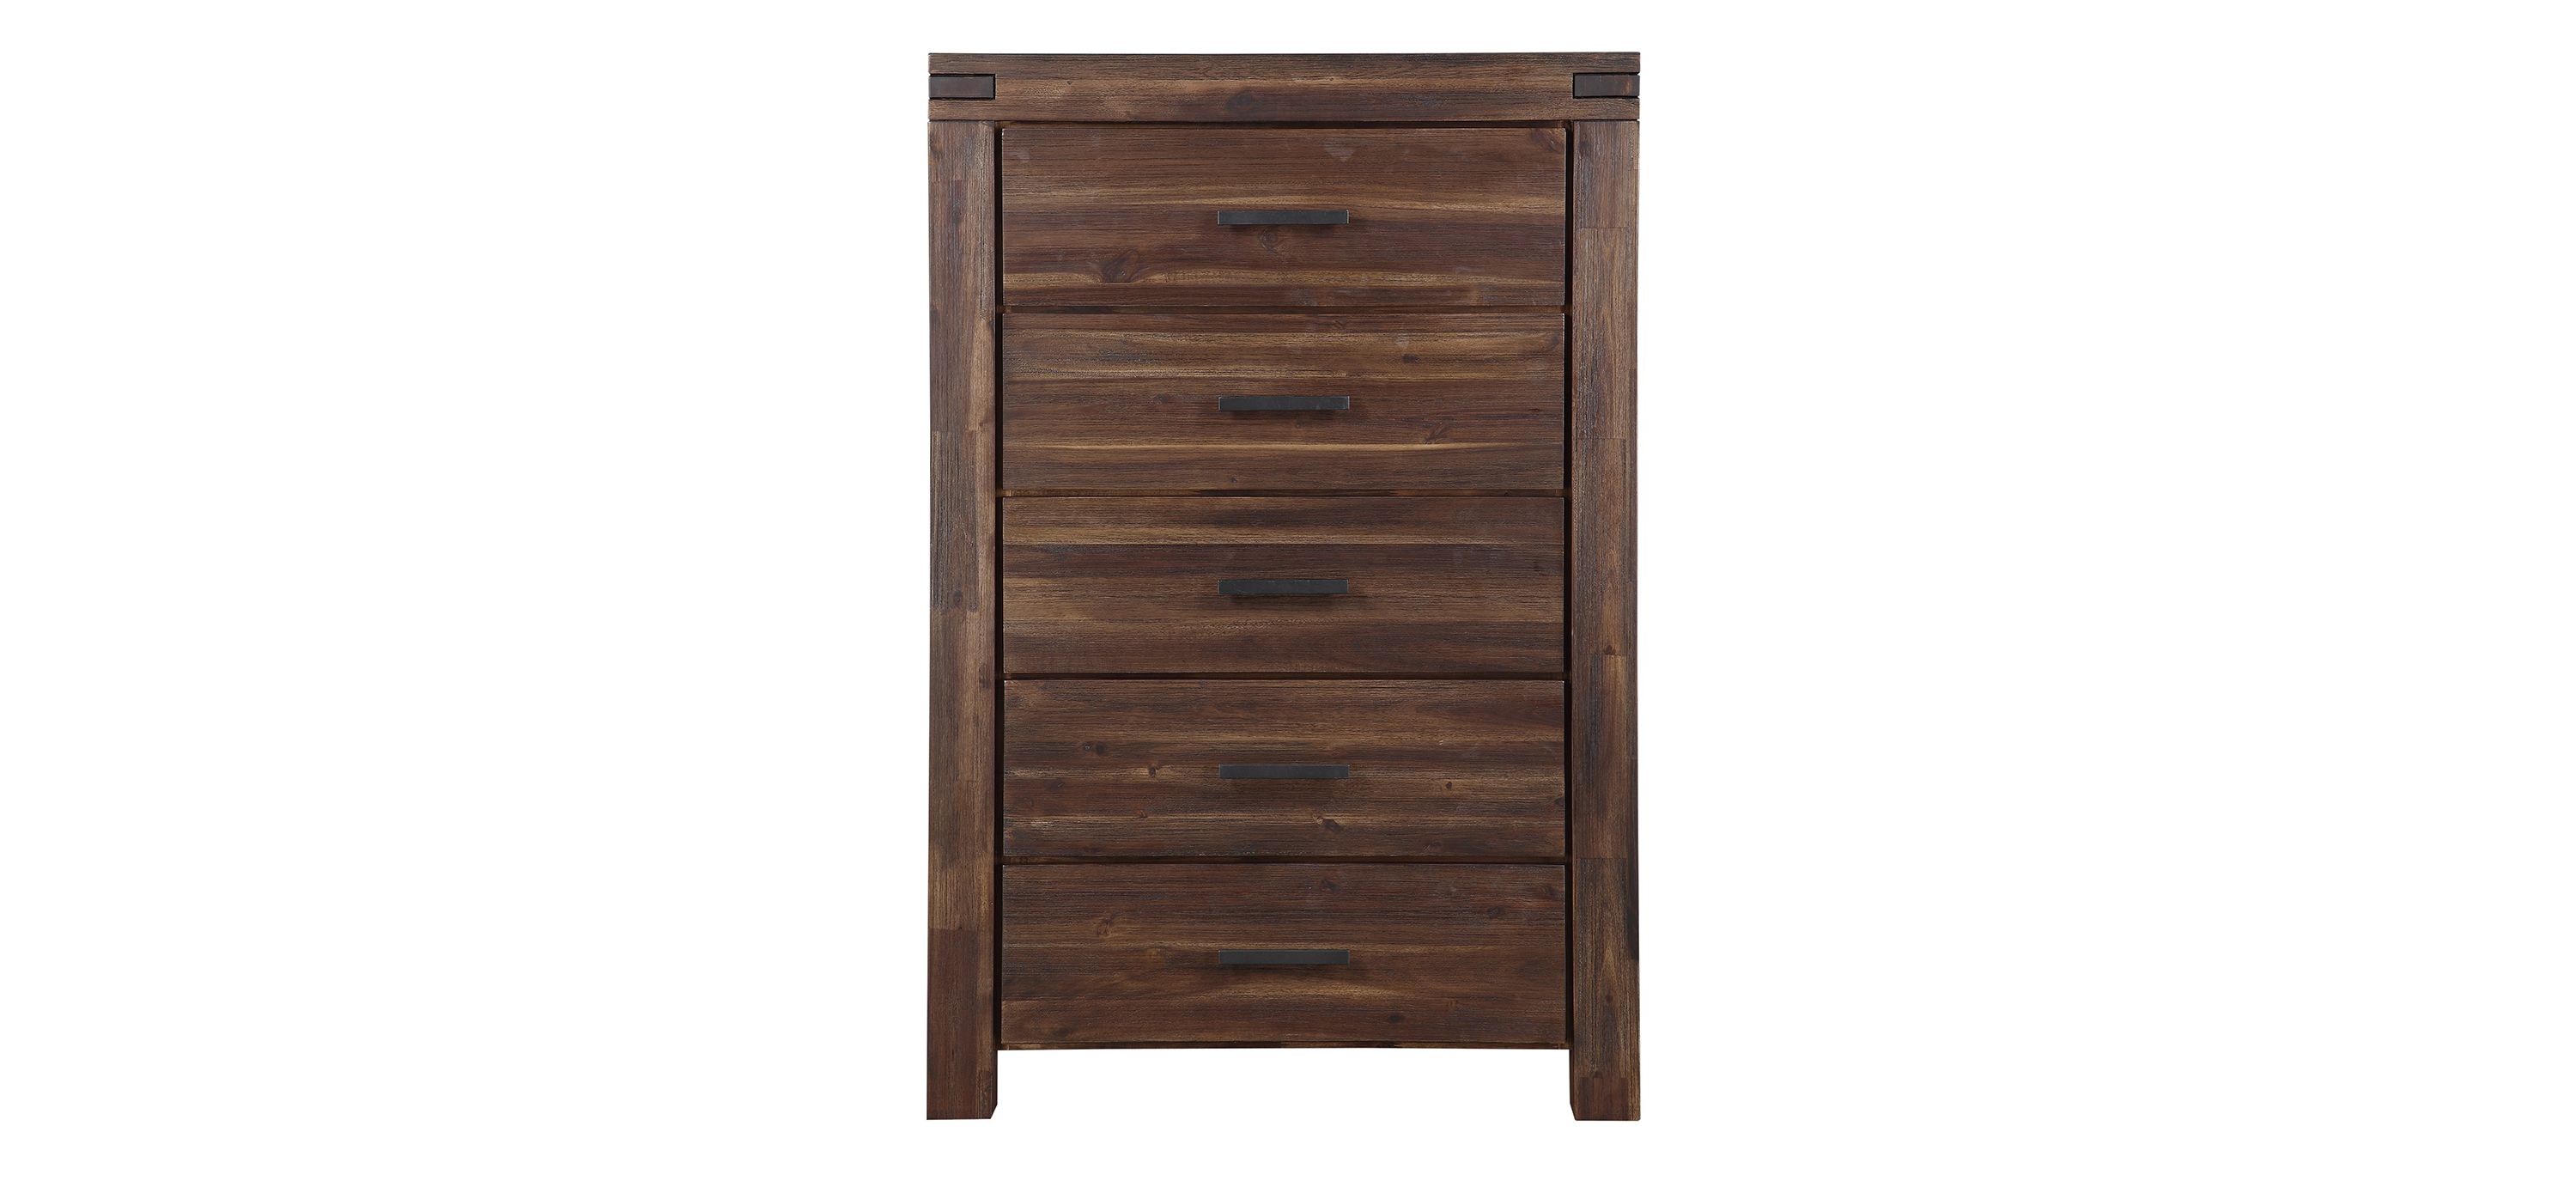 Middlefield Bedroom Chest